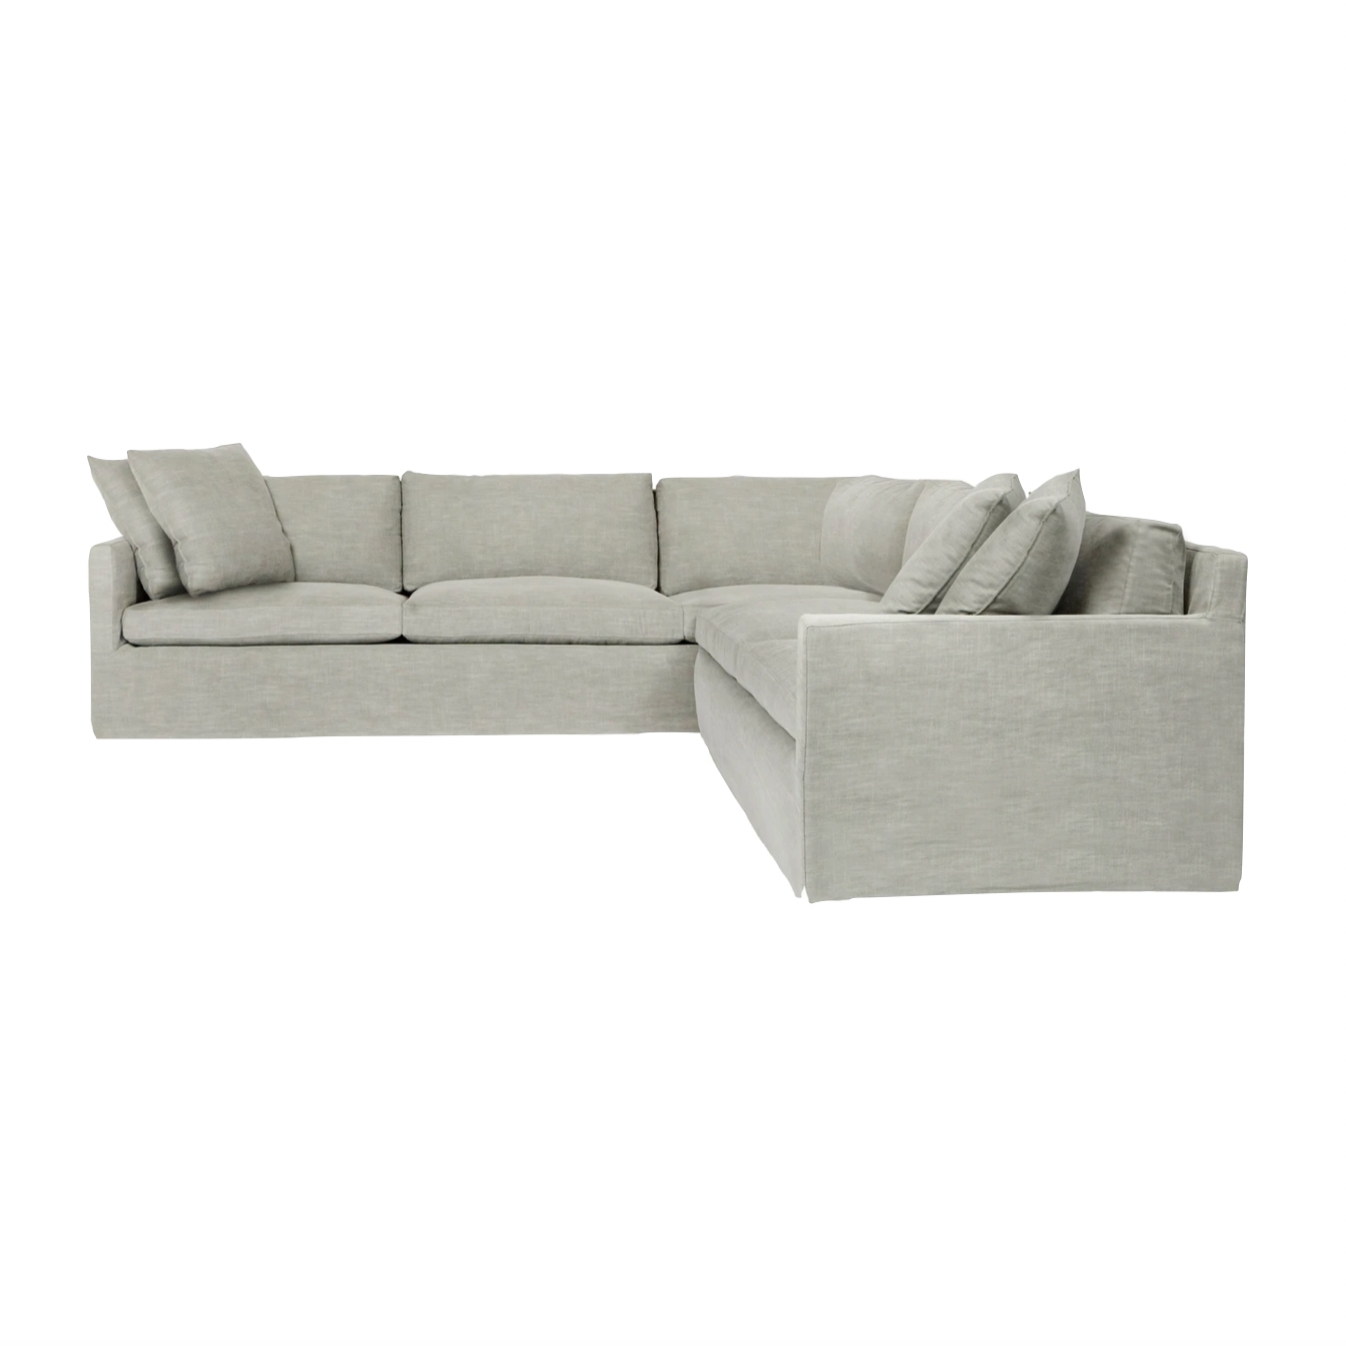 A modern, tailored sofa made with the right stuff -- the Louis 2 Arm Sectional - Essentials is a classic, updated silhouette that is stunning in Cisco Brothers' curated fabric selection.  It’s two-over-two cushions provide the perfect seating to catch up with old friends or entertain new ones.  Overall: 120"w x 120"d x 31"h